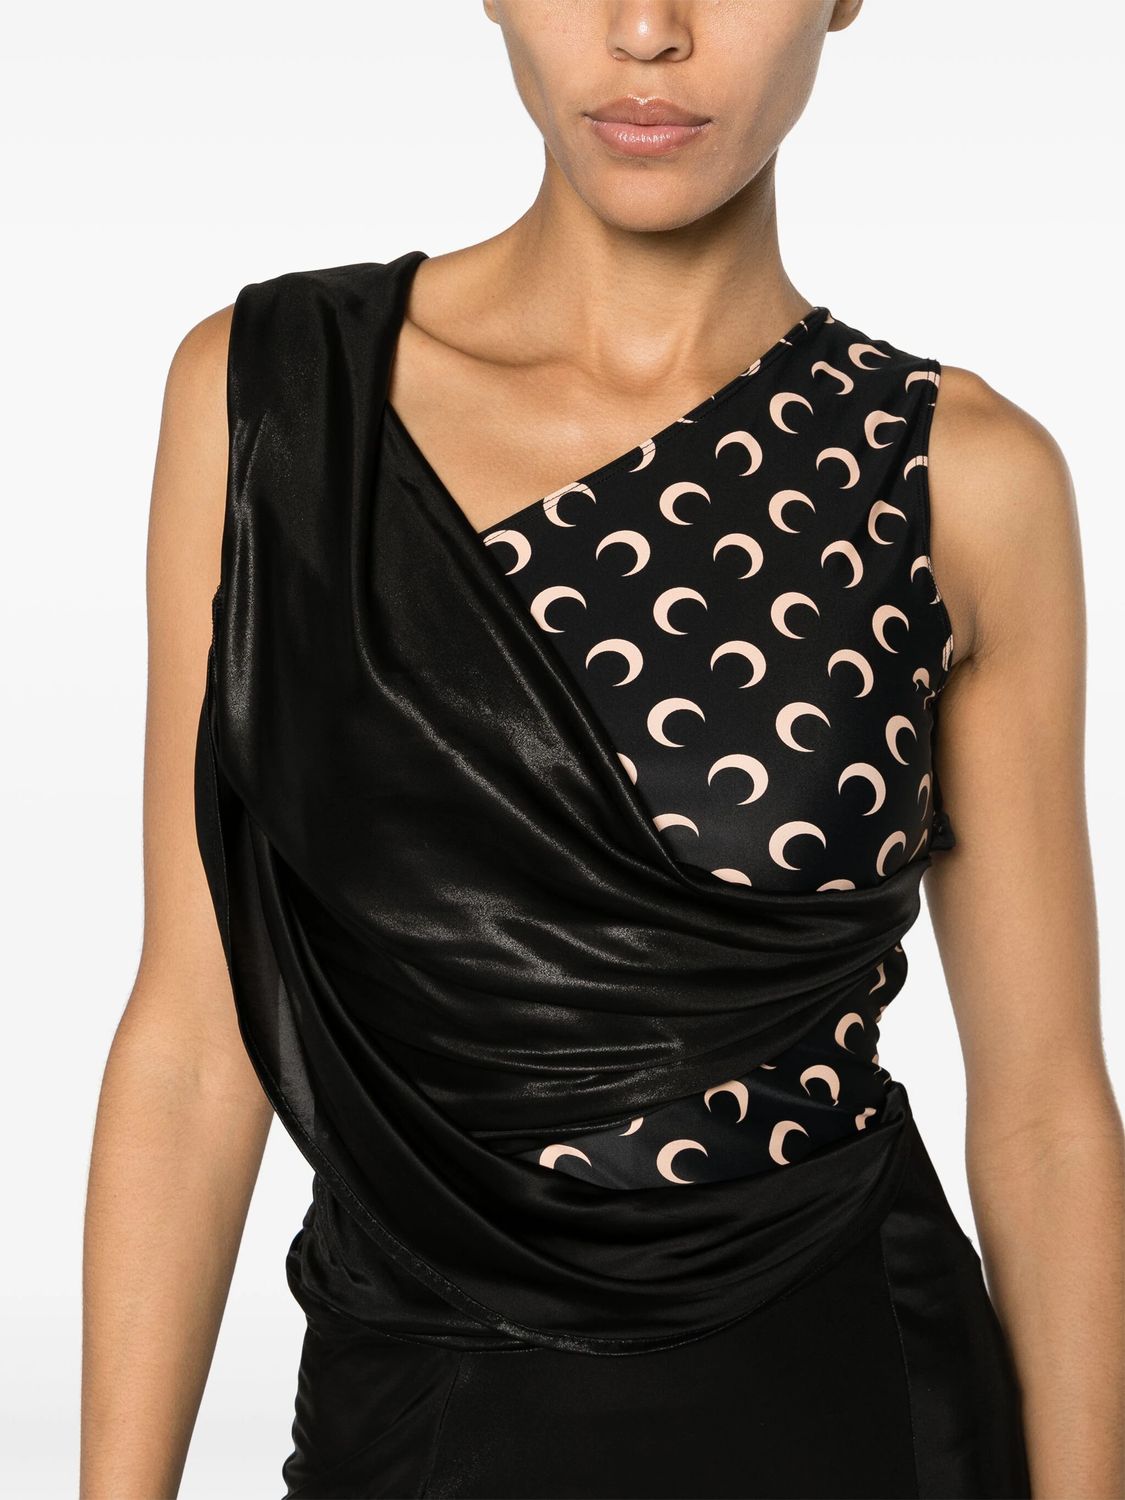 MARINE SERRE Sophisticated Asymmetric Dress with Crescent Moon Print